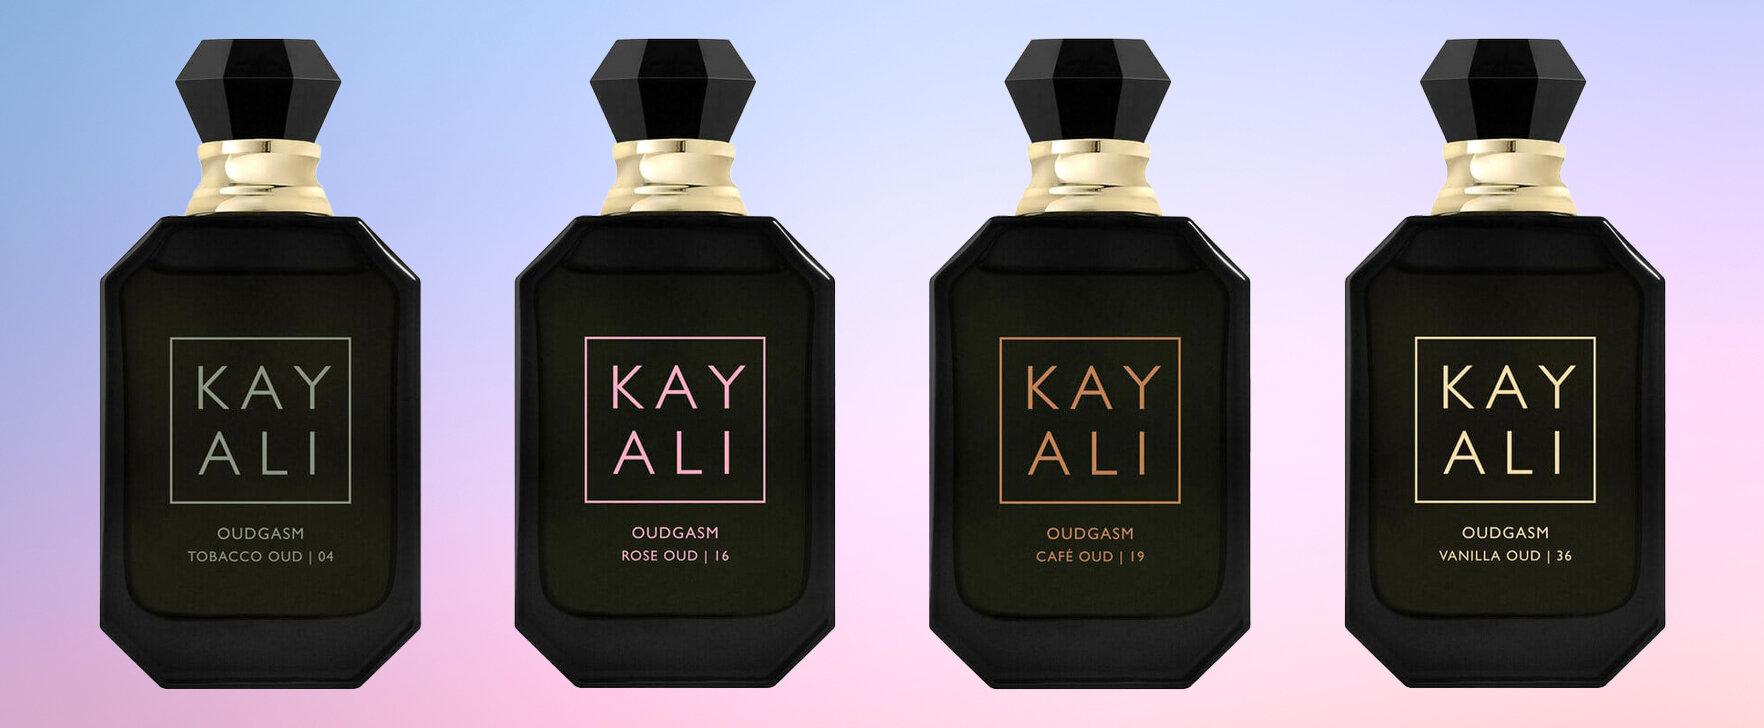 The New Oudgasm Collection by Kayali: A Journey Into the World of Oud